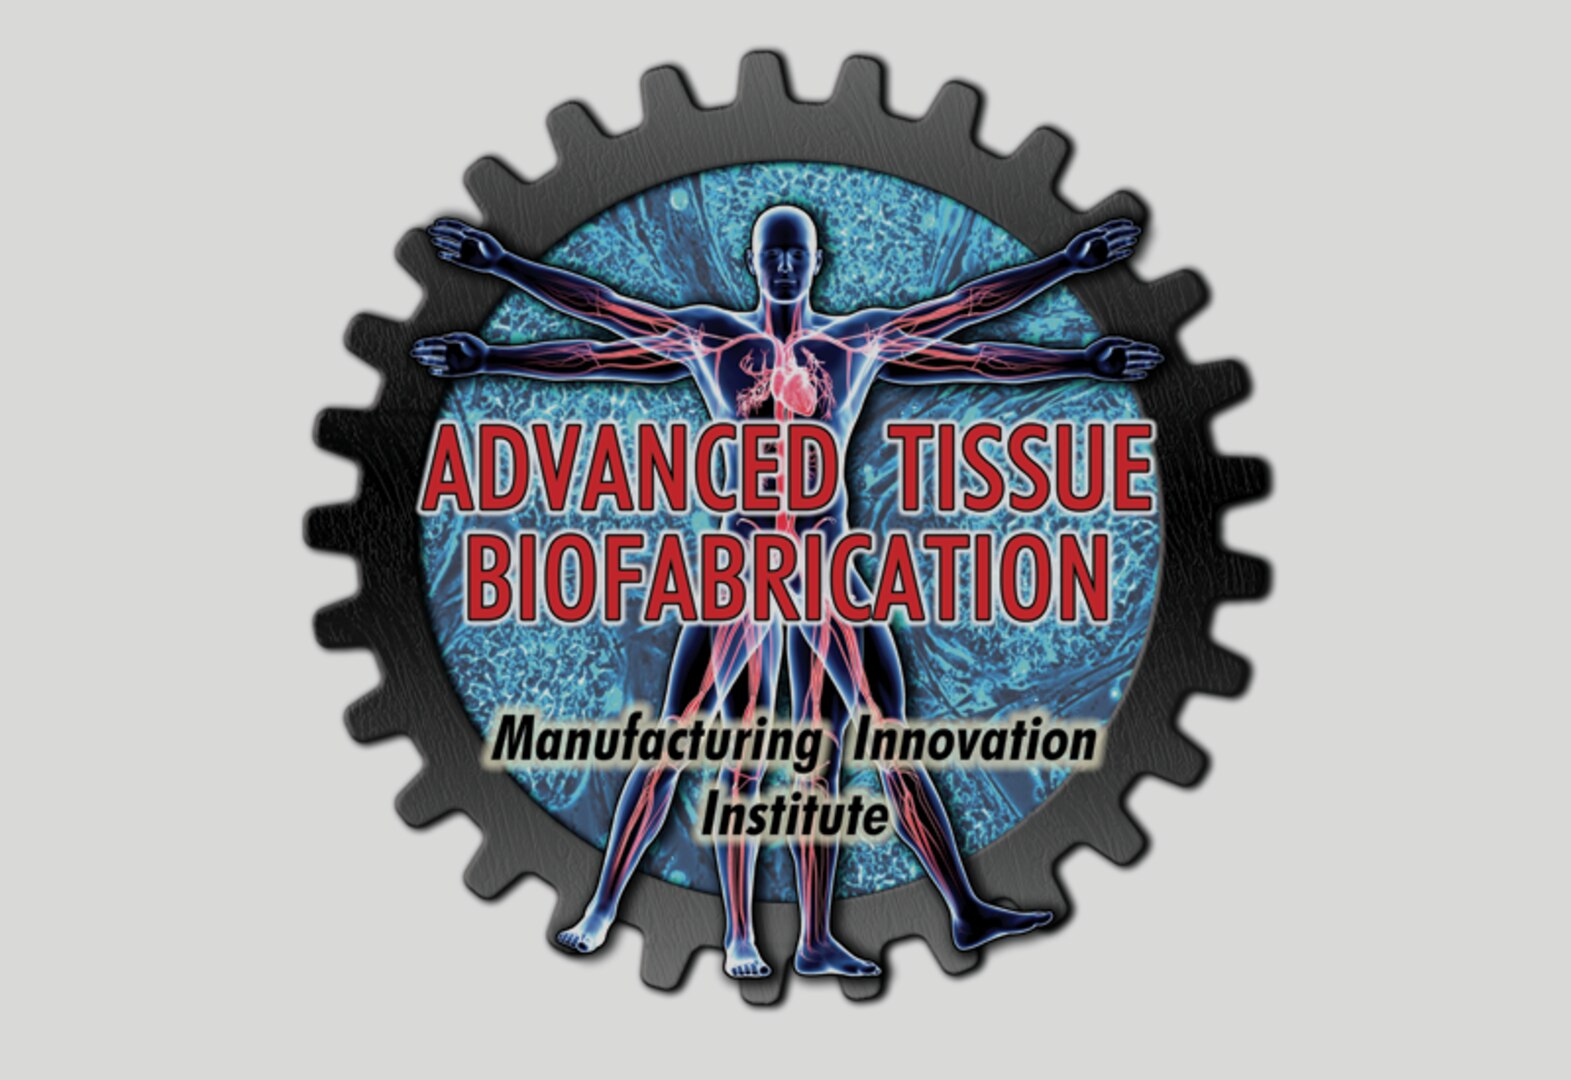 Advanced Tissue Biofabrication Manufacturing Innovation Institute